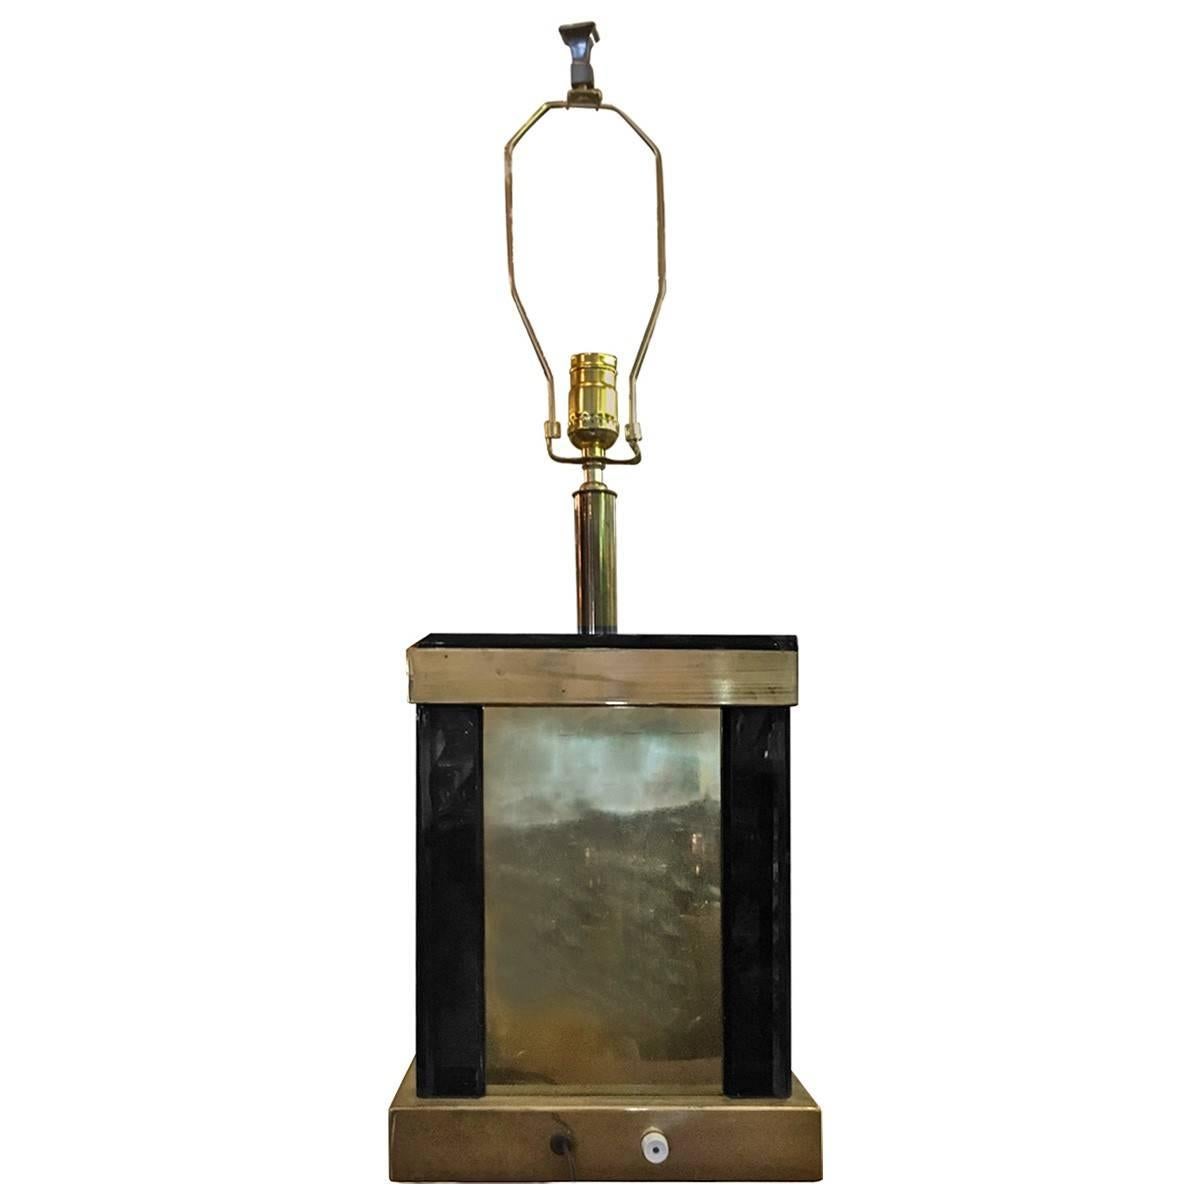 Modern brass table lamp features a rectangular shape that presents a bold and sophisticated style that exudes handsome craftsmanship. A beautiful fixture, this lamp would be ideal for an end table or nightstand for both decorative and lighting